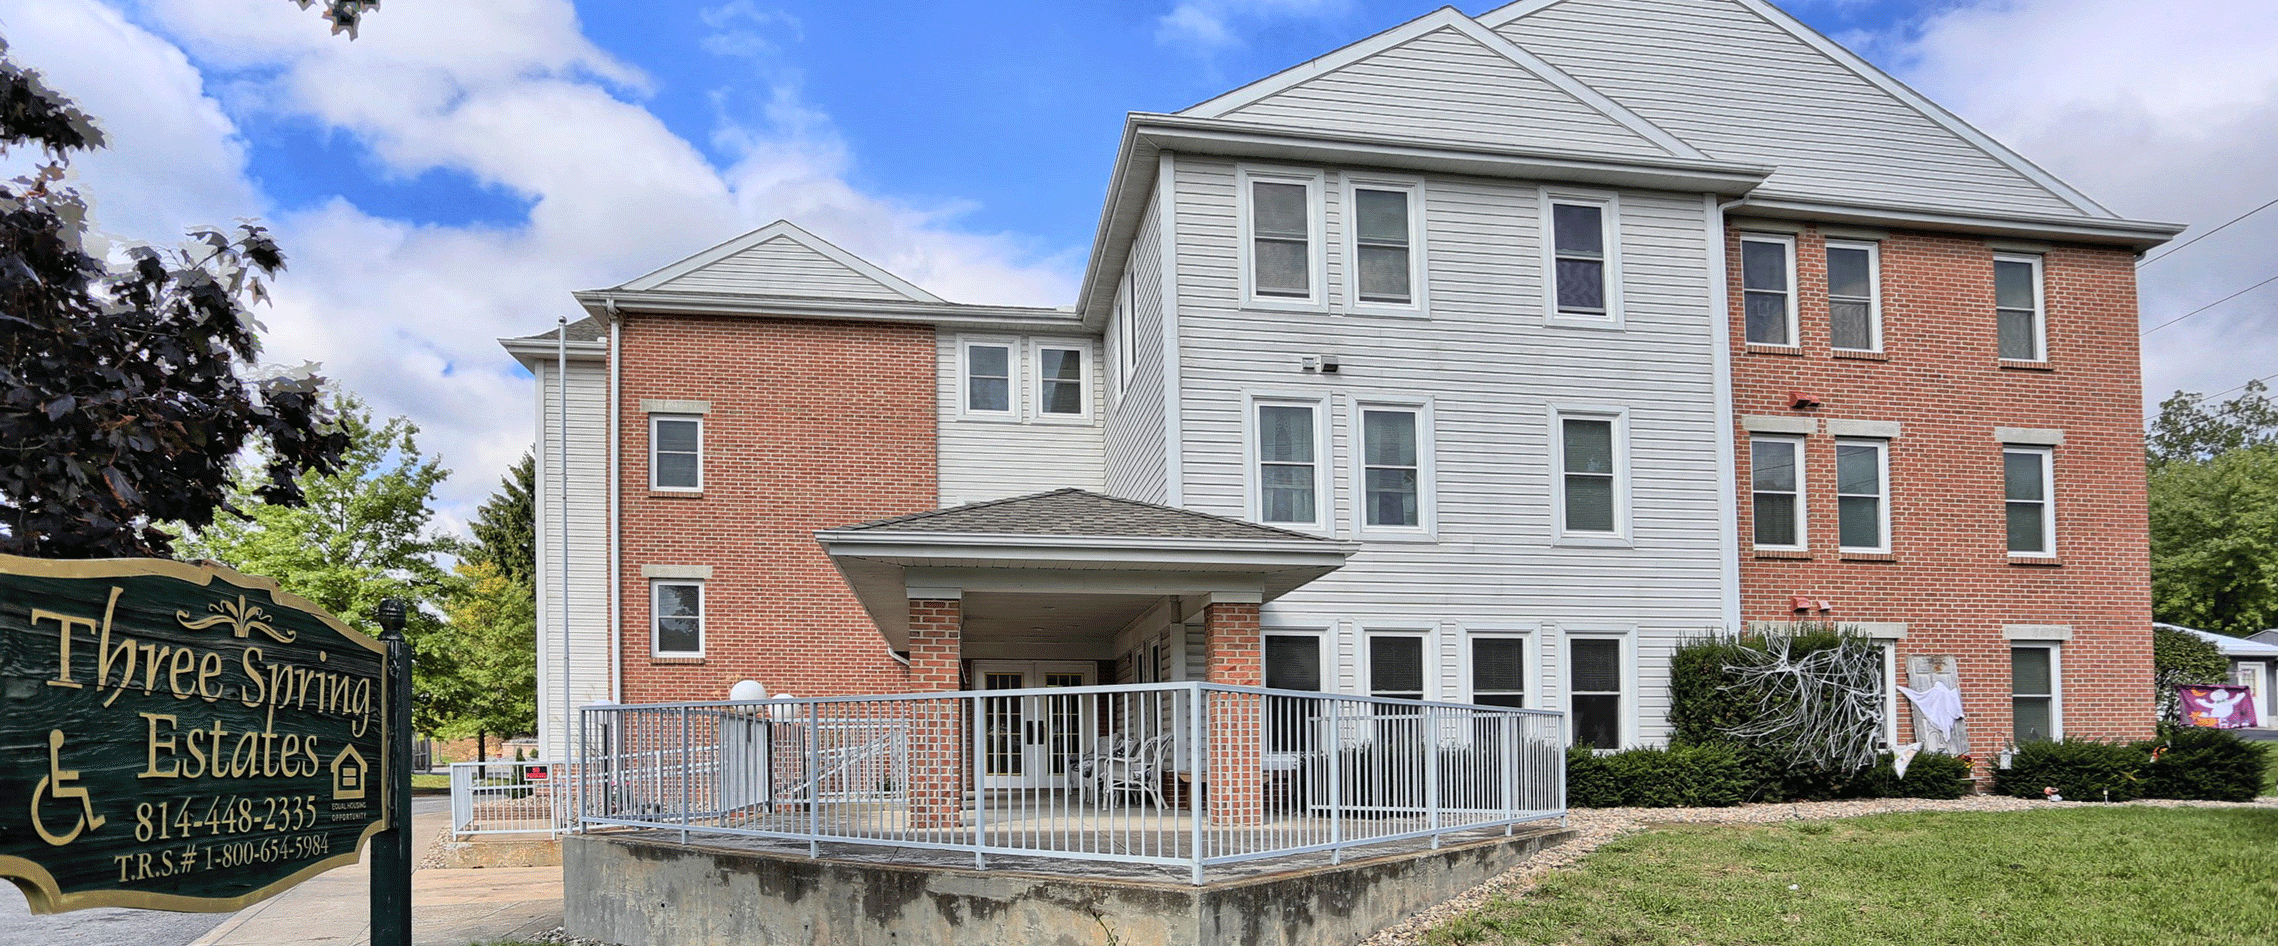 Low Income Apartment in Three Springs, PA | Three Springs Estates | Property Management, Inc.